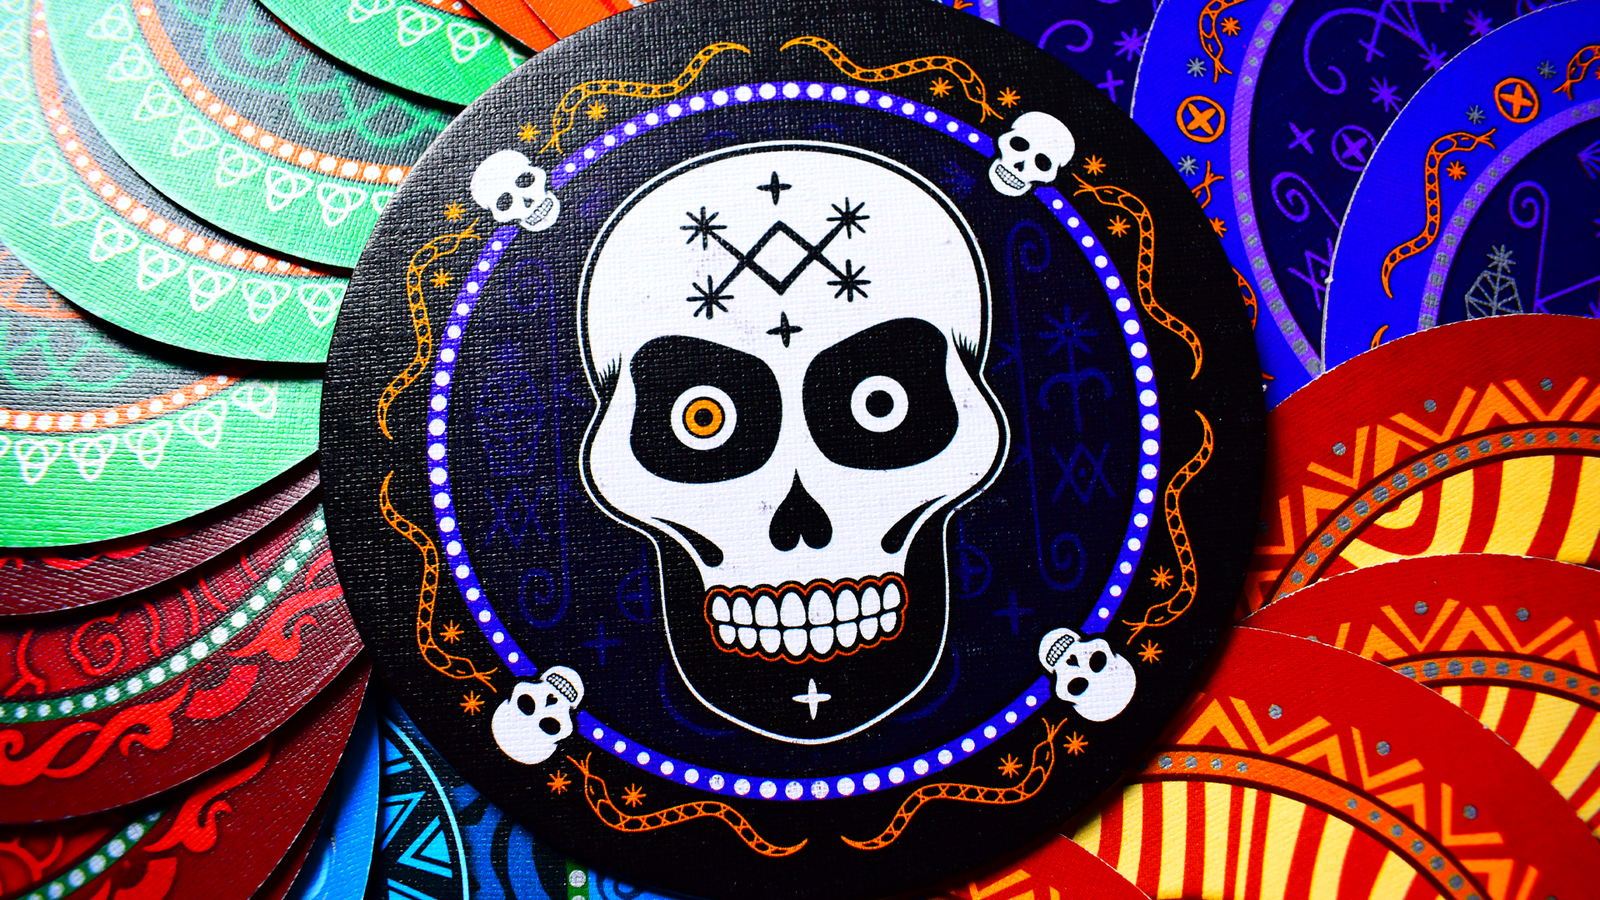 https://assetsio.reedpopcdn.com/skull-party-board-game-photo-1.JPG?width=1600&height=900&fit=crop&quality=100&format=png&enable=upscale&auto=webp